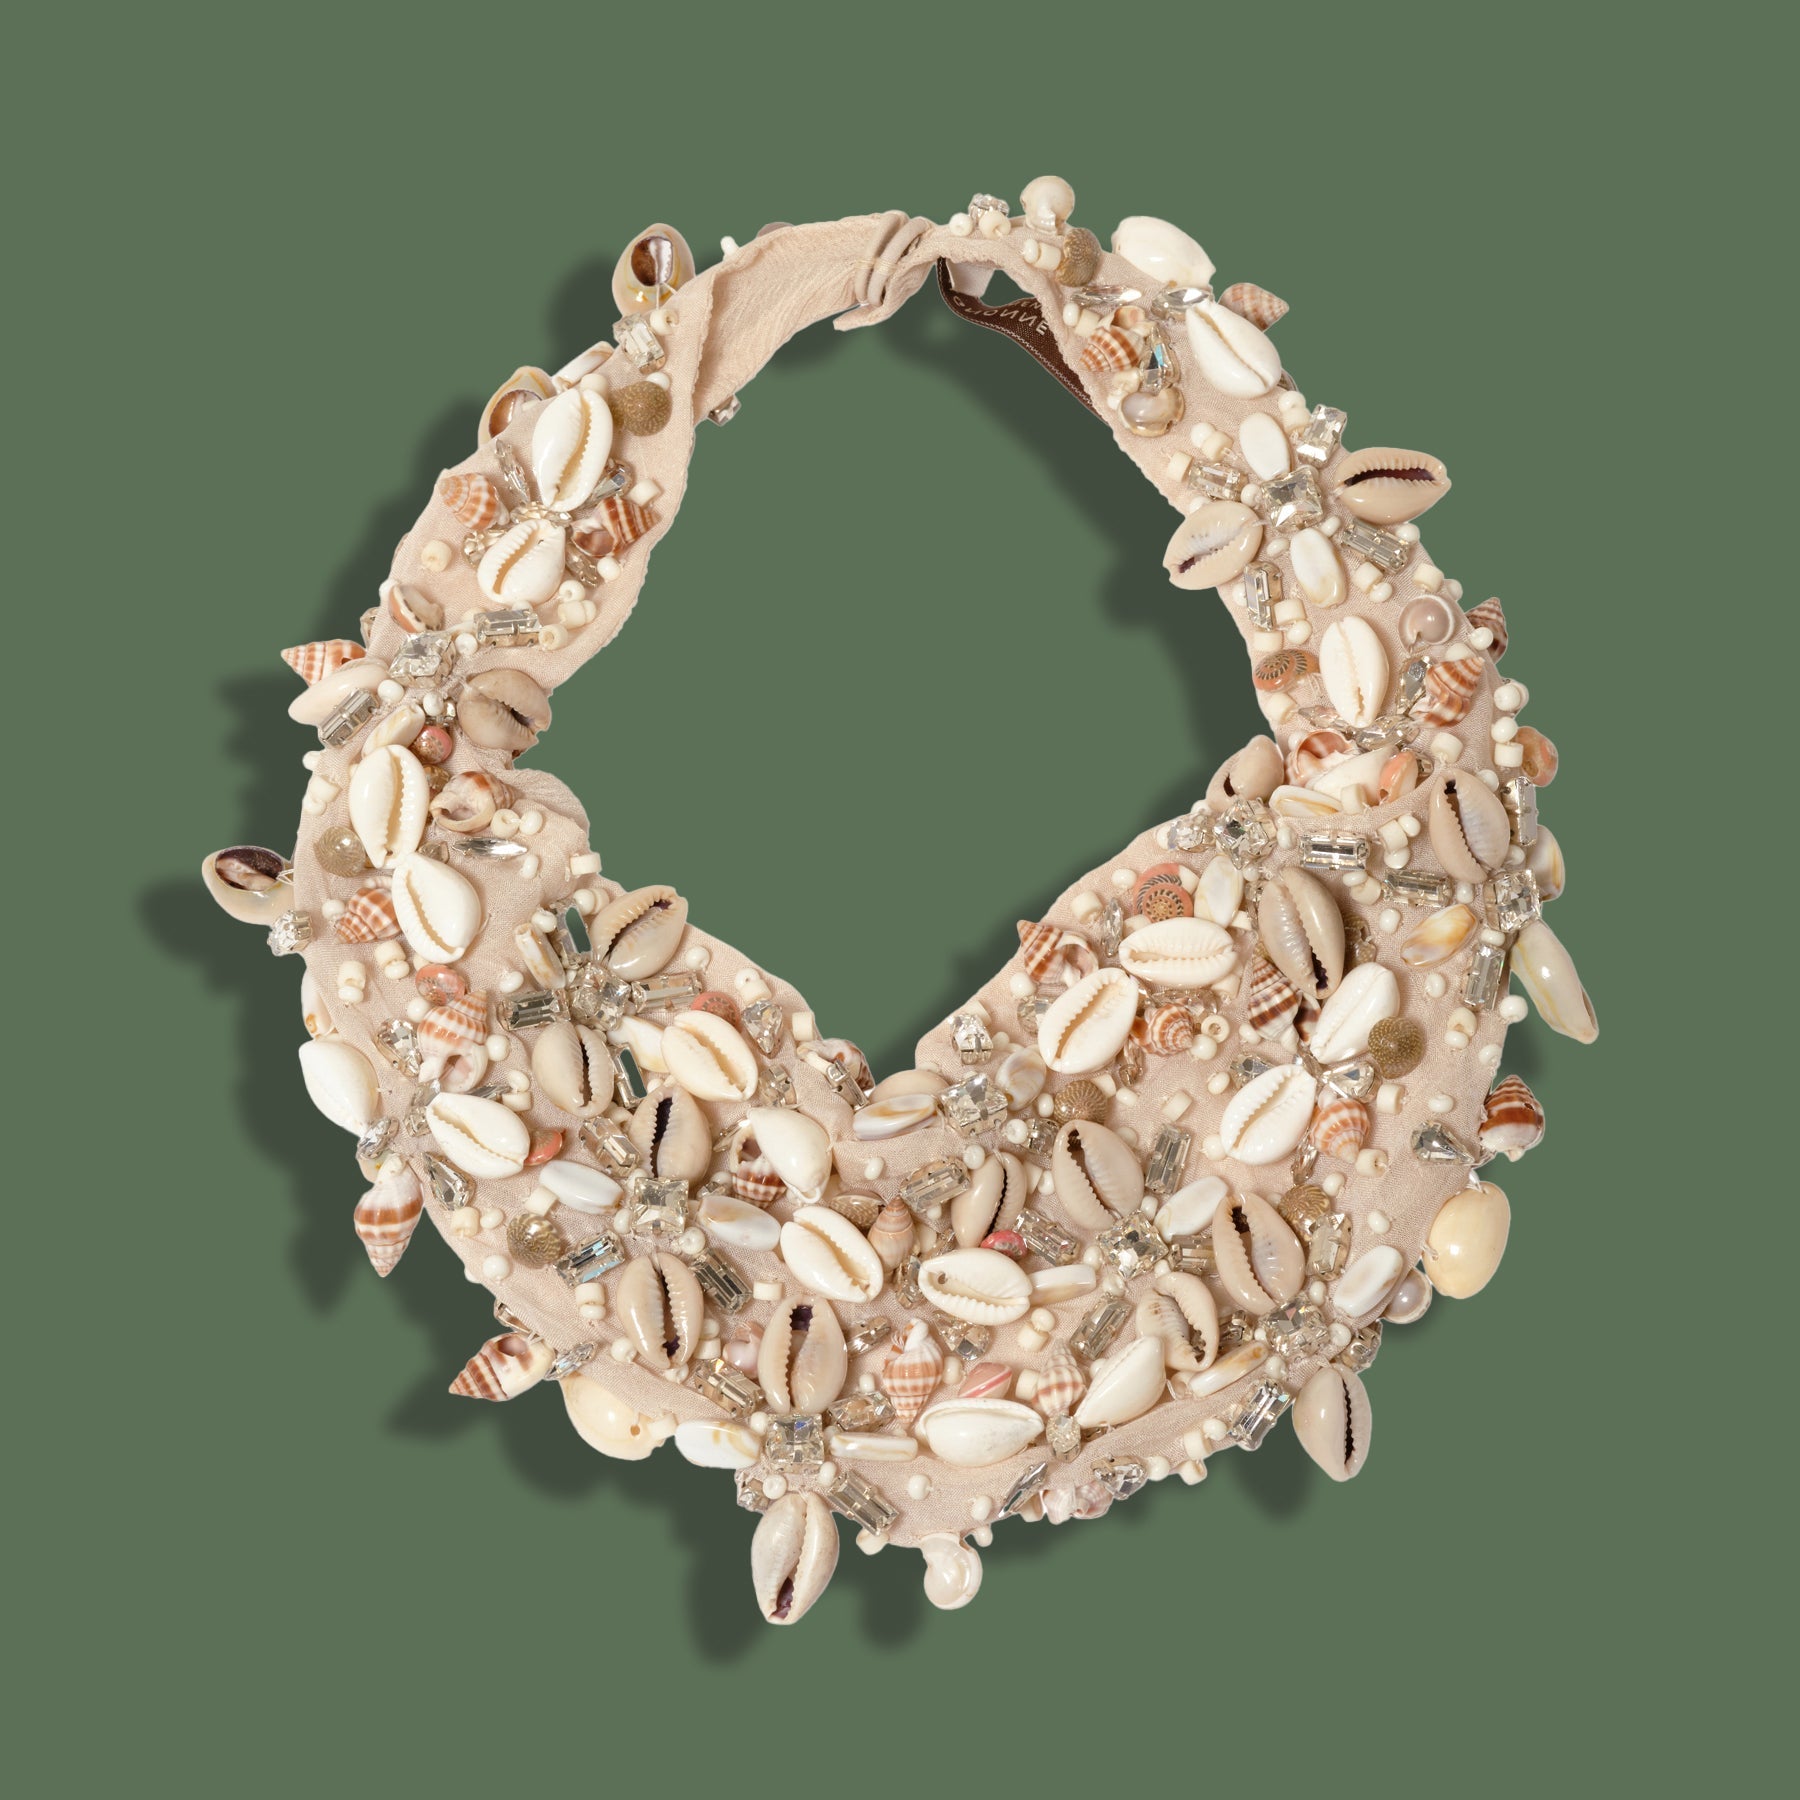 Campbell Mini Scarf Necklace by Mignonne Gavigan